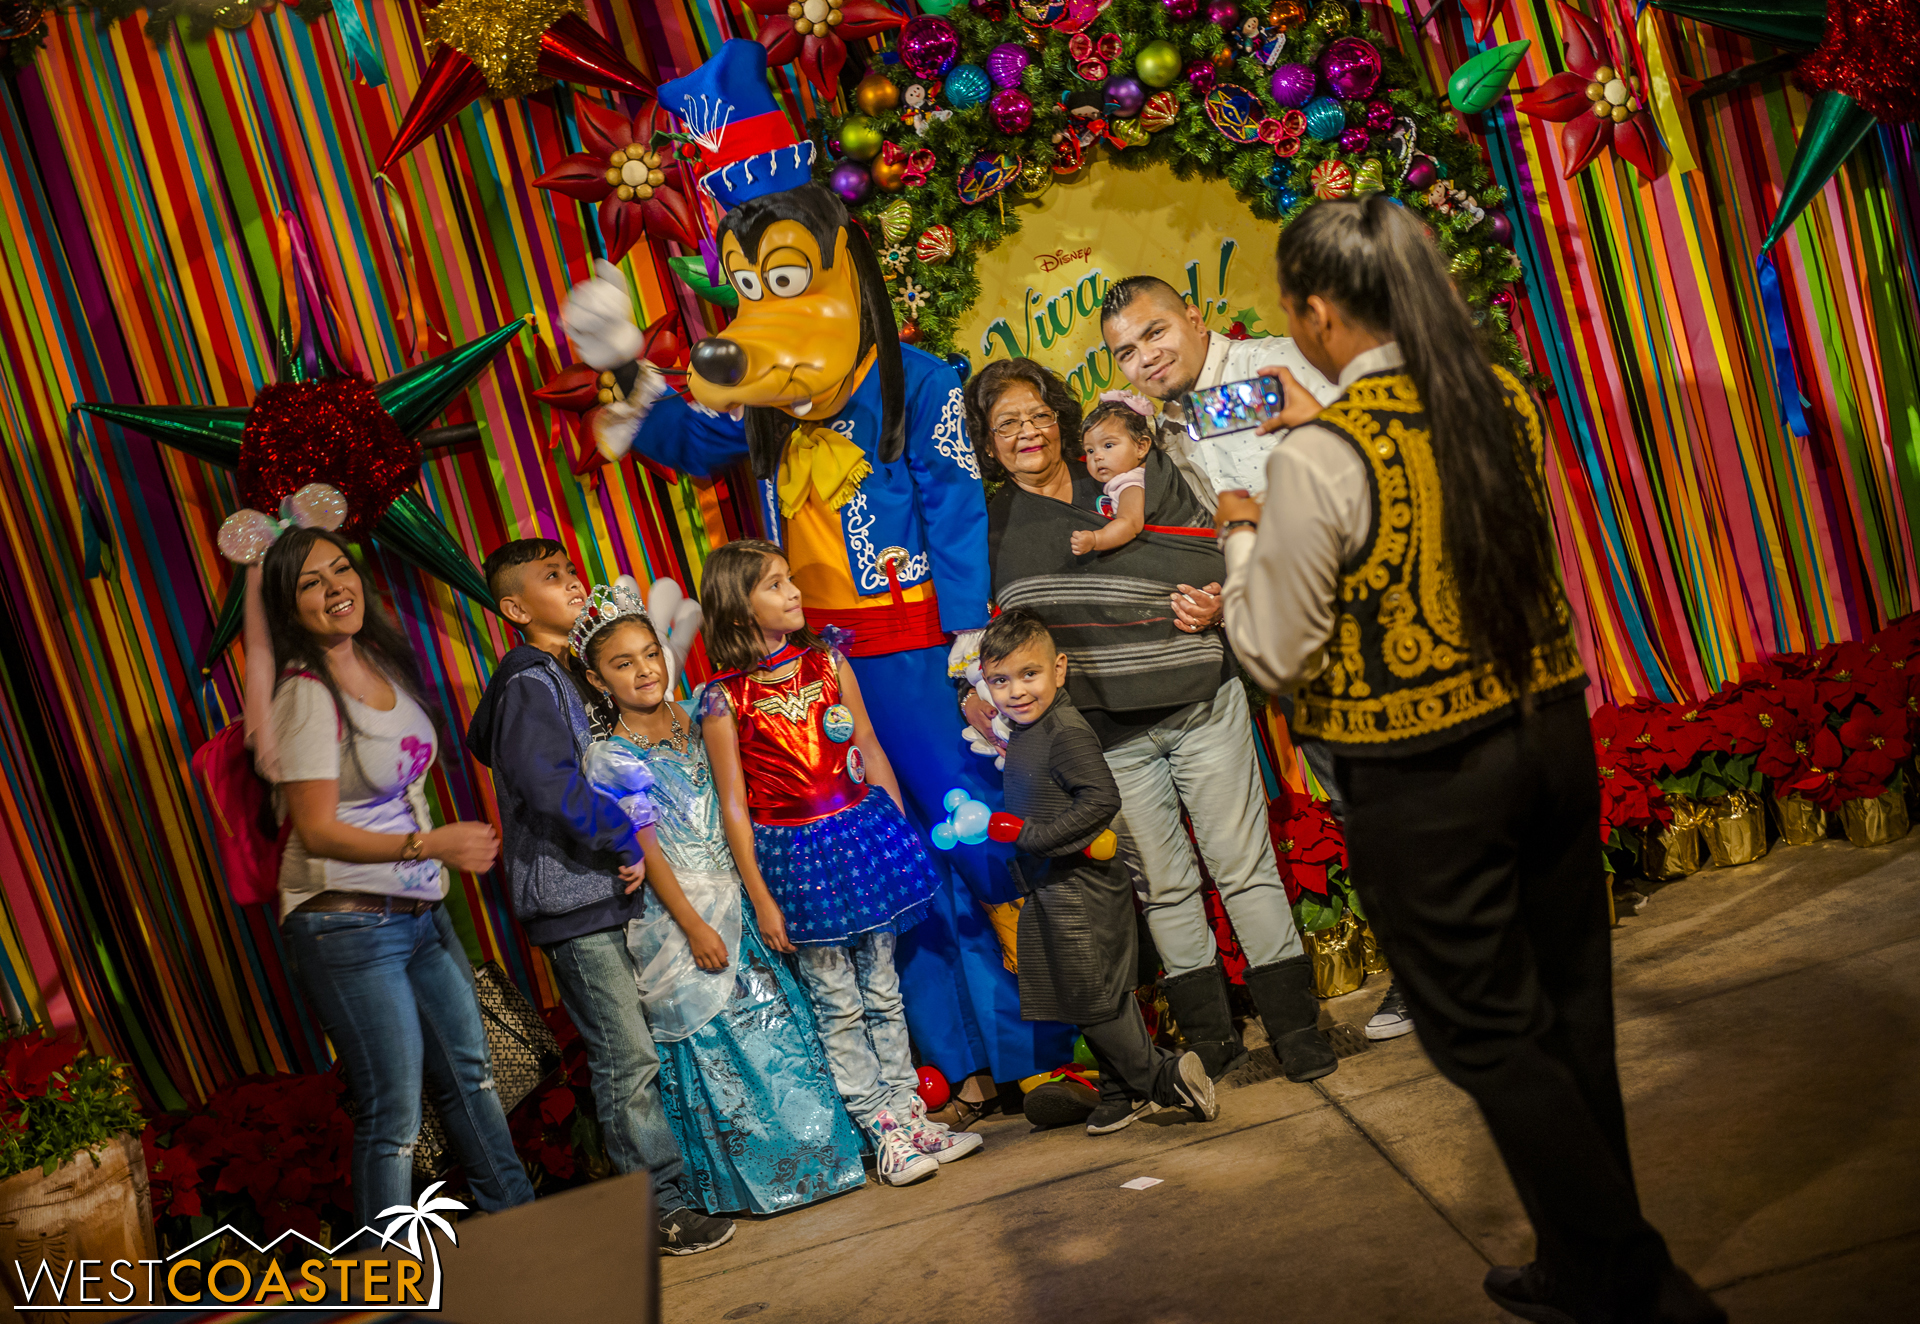  Guests can pose with Hispanic Goofy, or as they call him in Spanish... Goofy. 